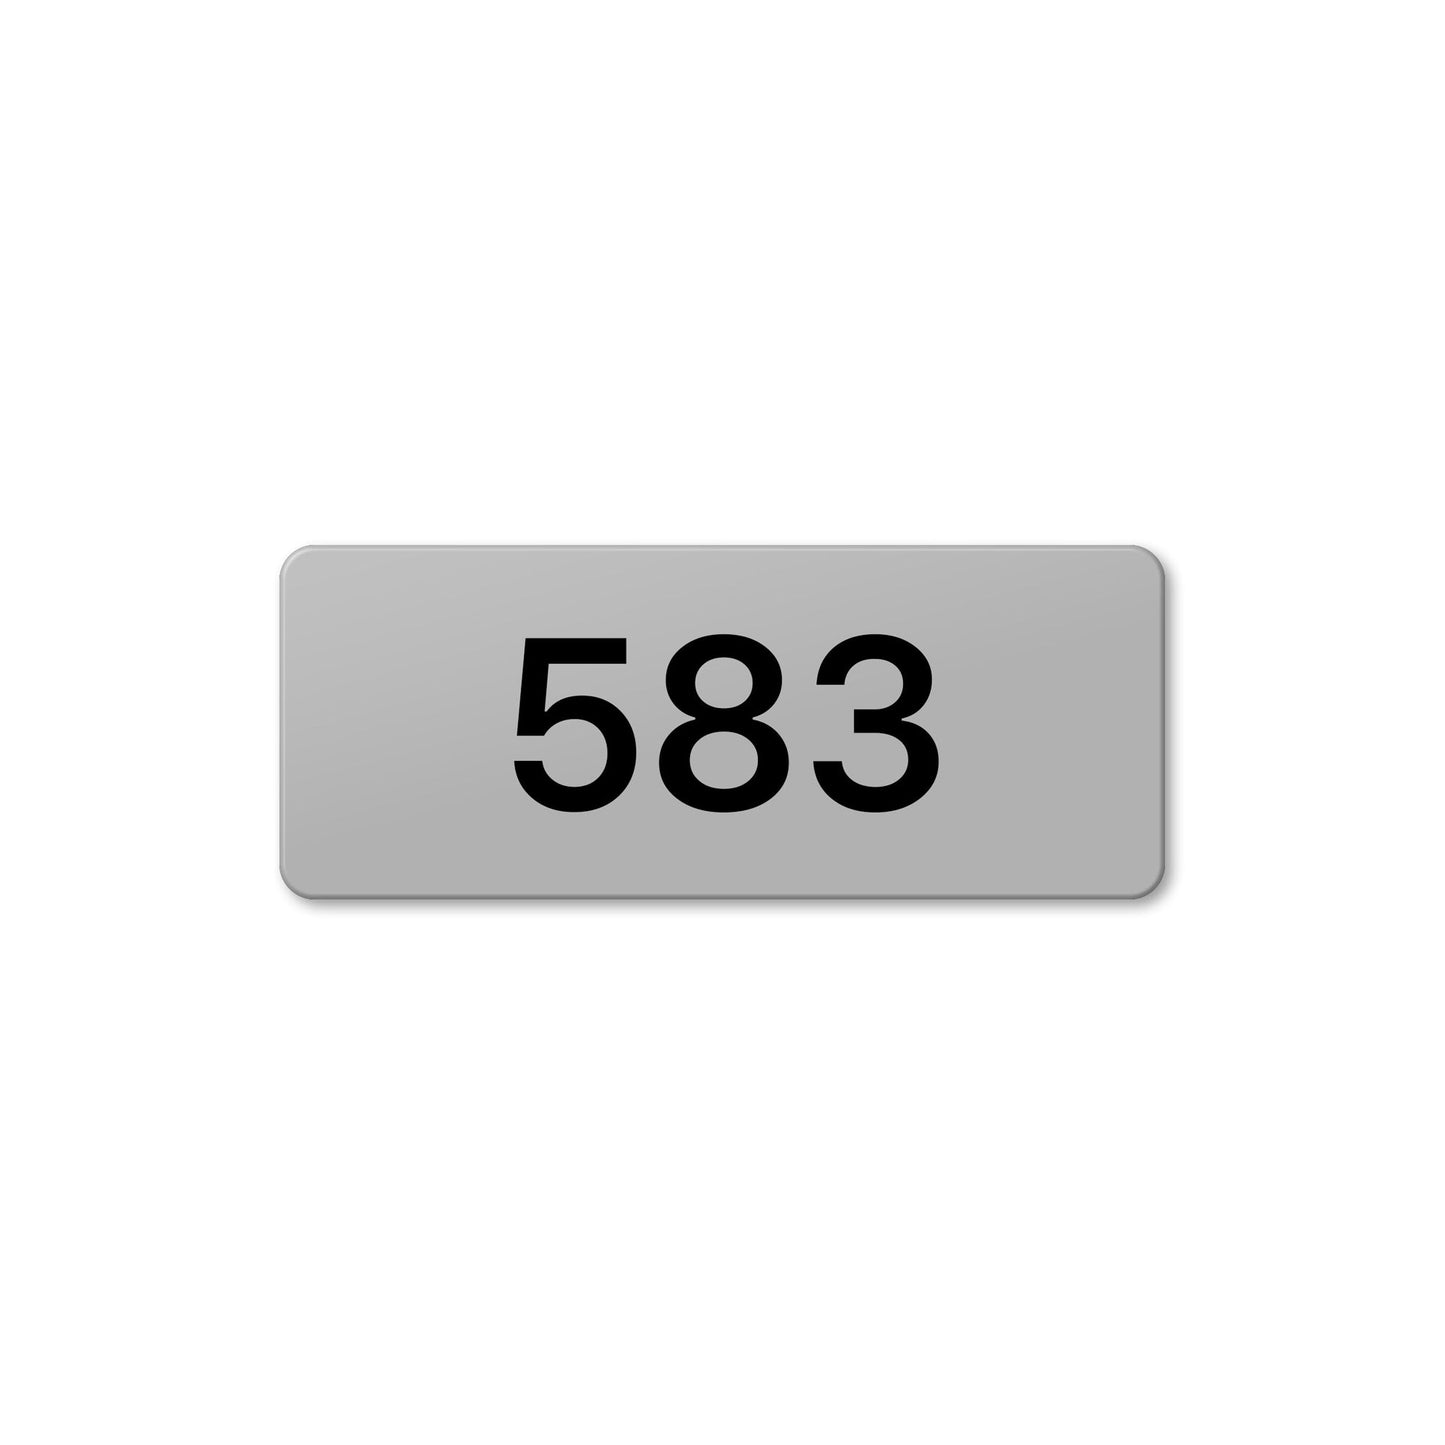 Numeral 583